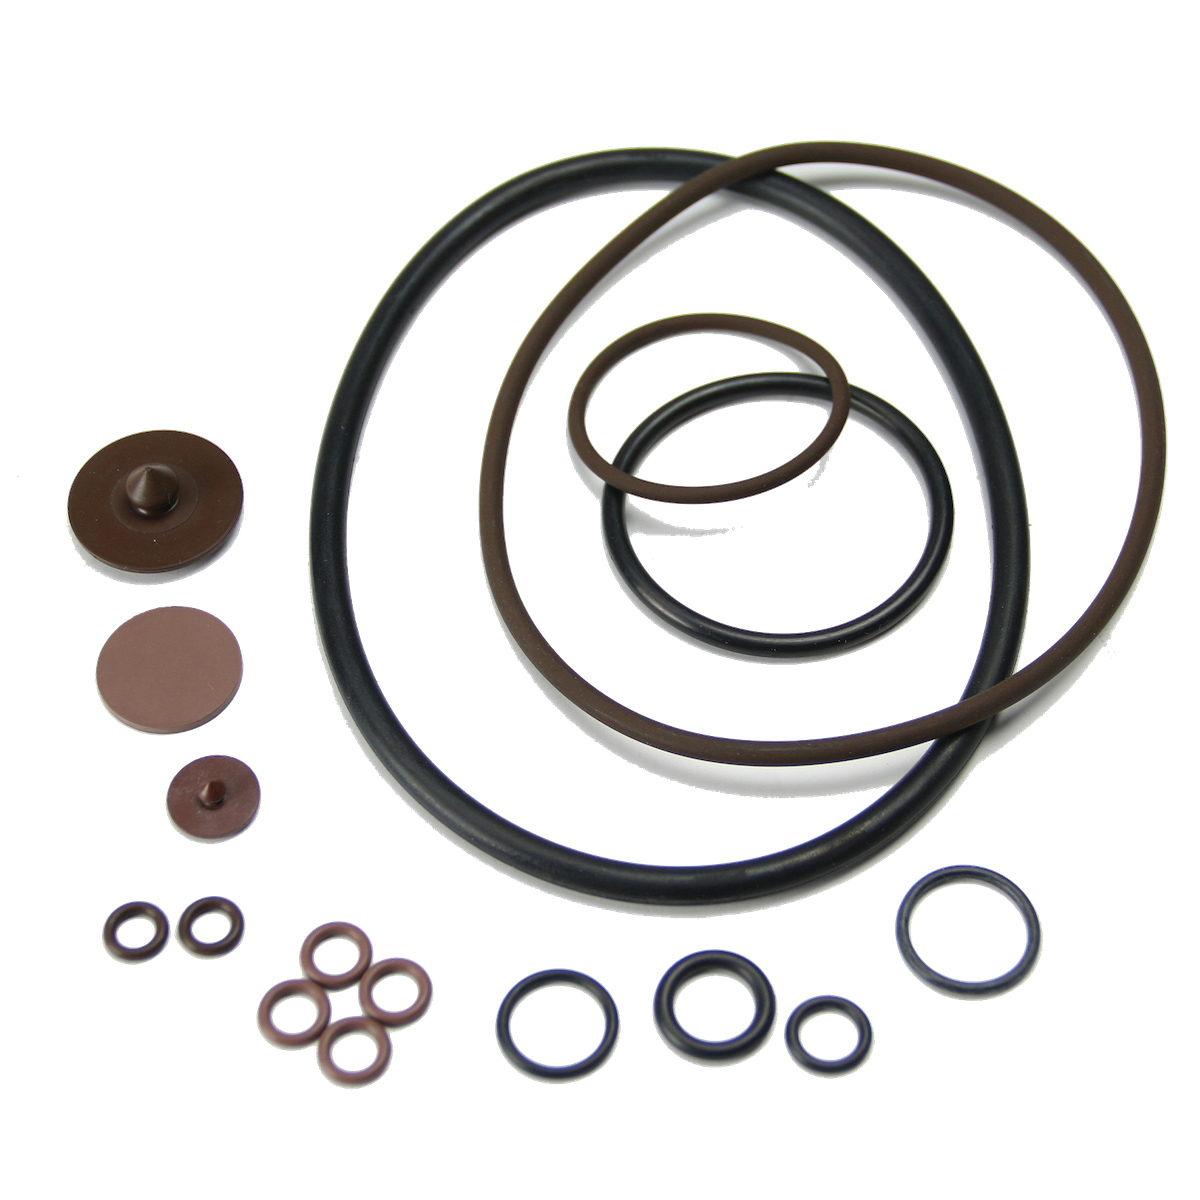 CHAPIN 6-5351 Repair Kit, For: 20200, 20225, 20226 and 20227 Compression Sprayer